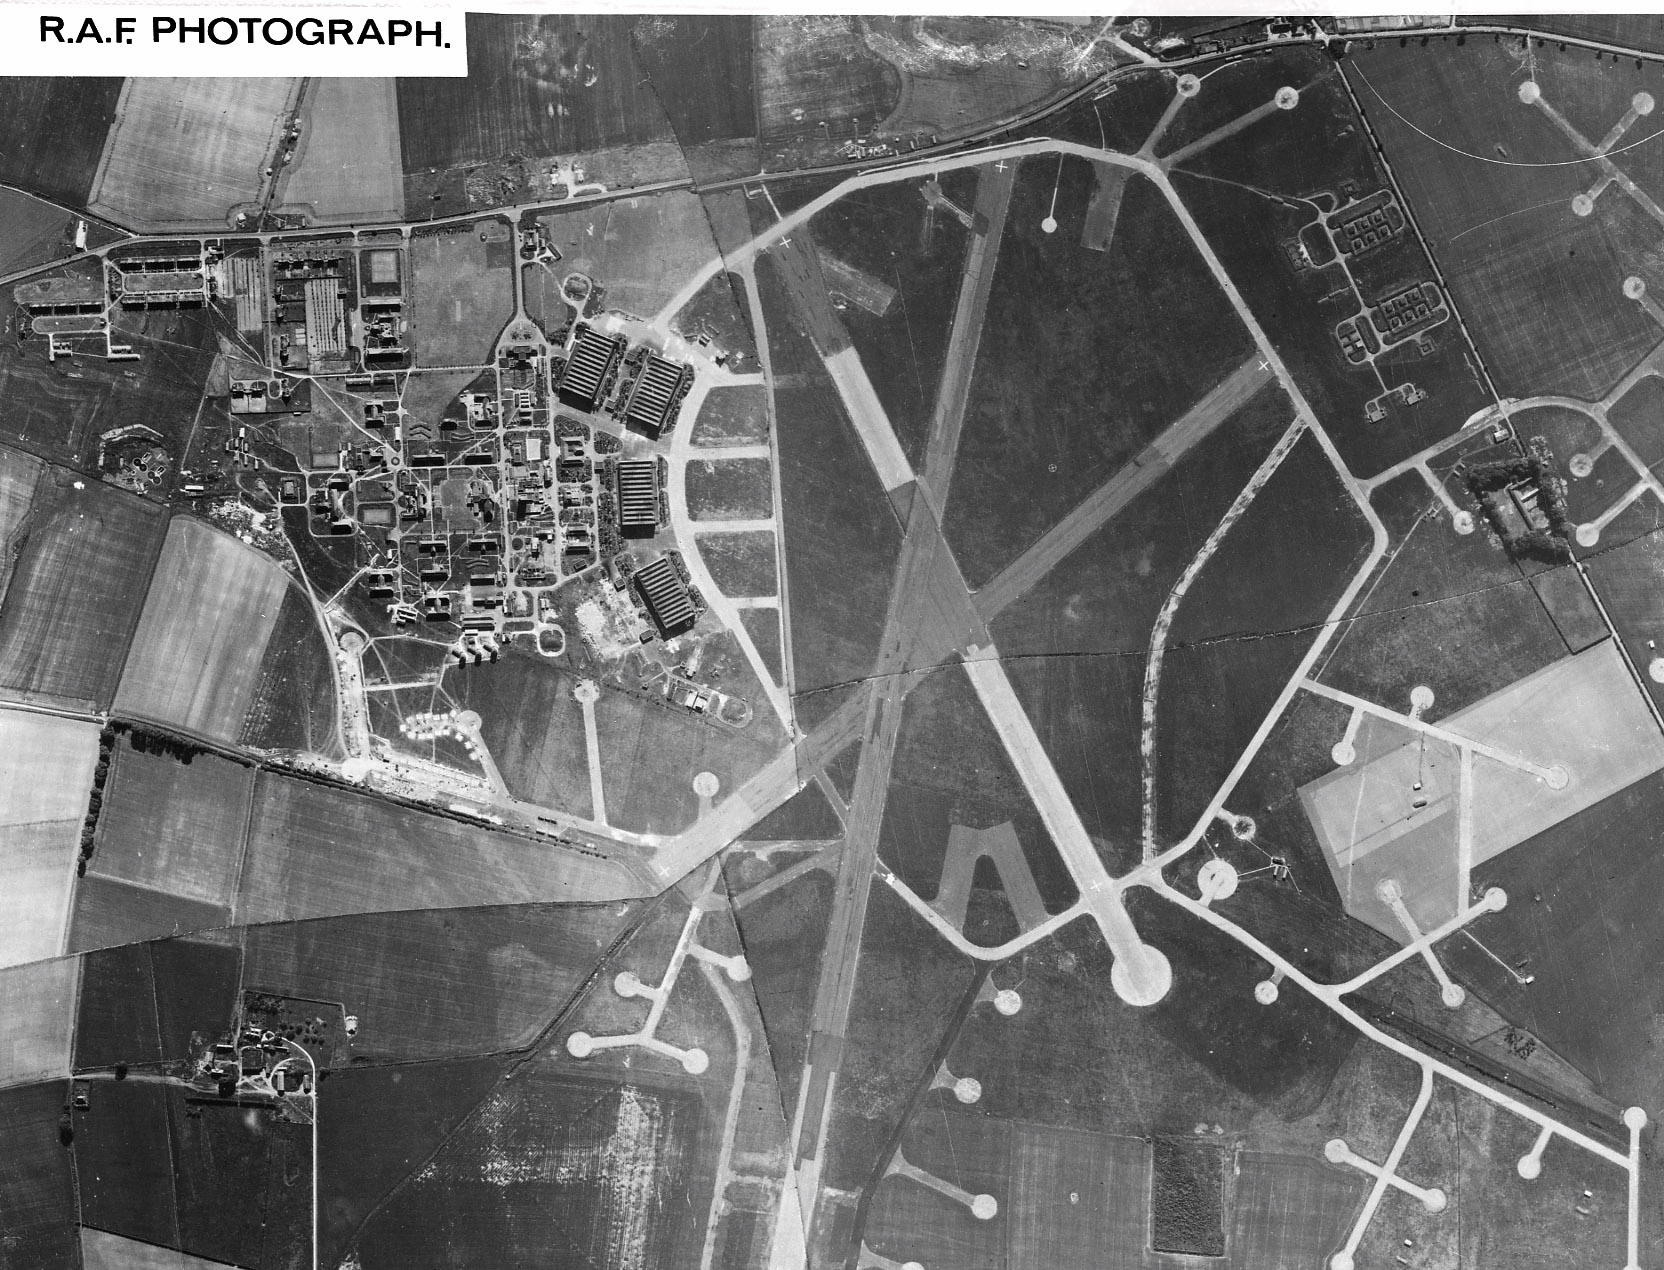 Photo 1 - RAF view  c 1944. Part of 3 Frame. HL46827A